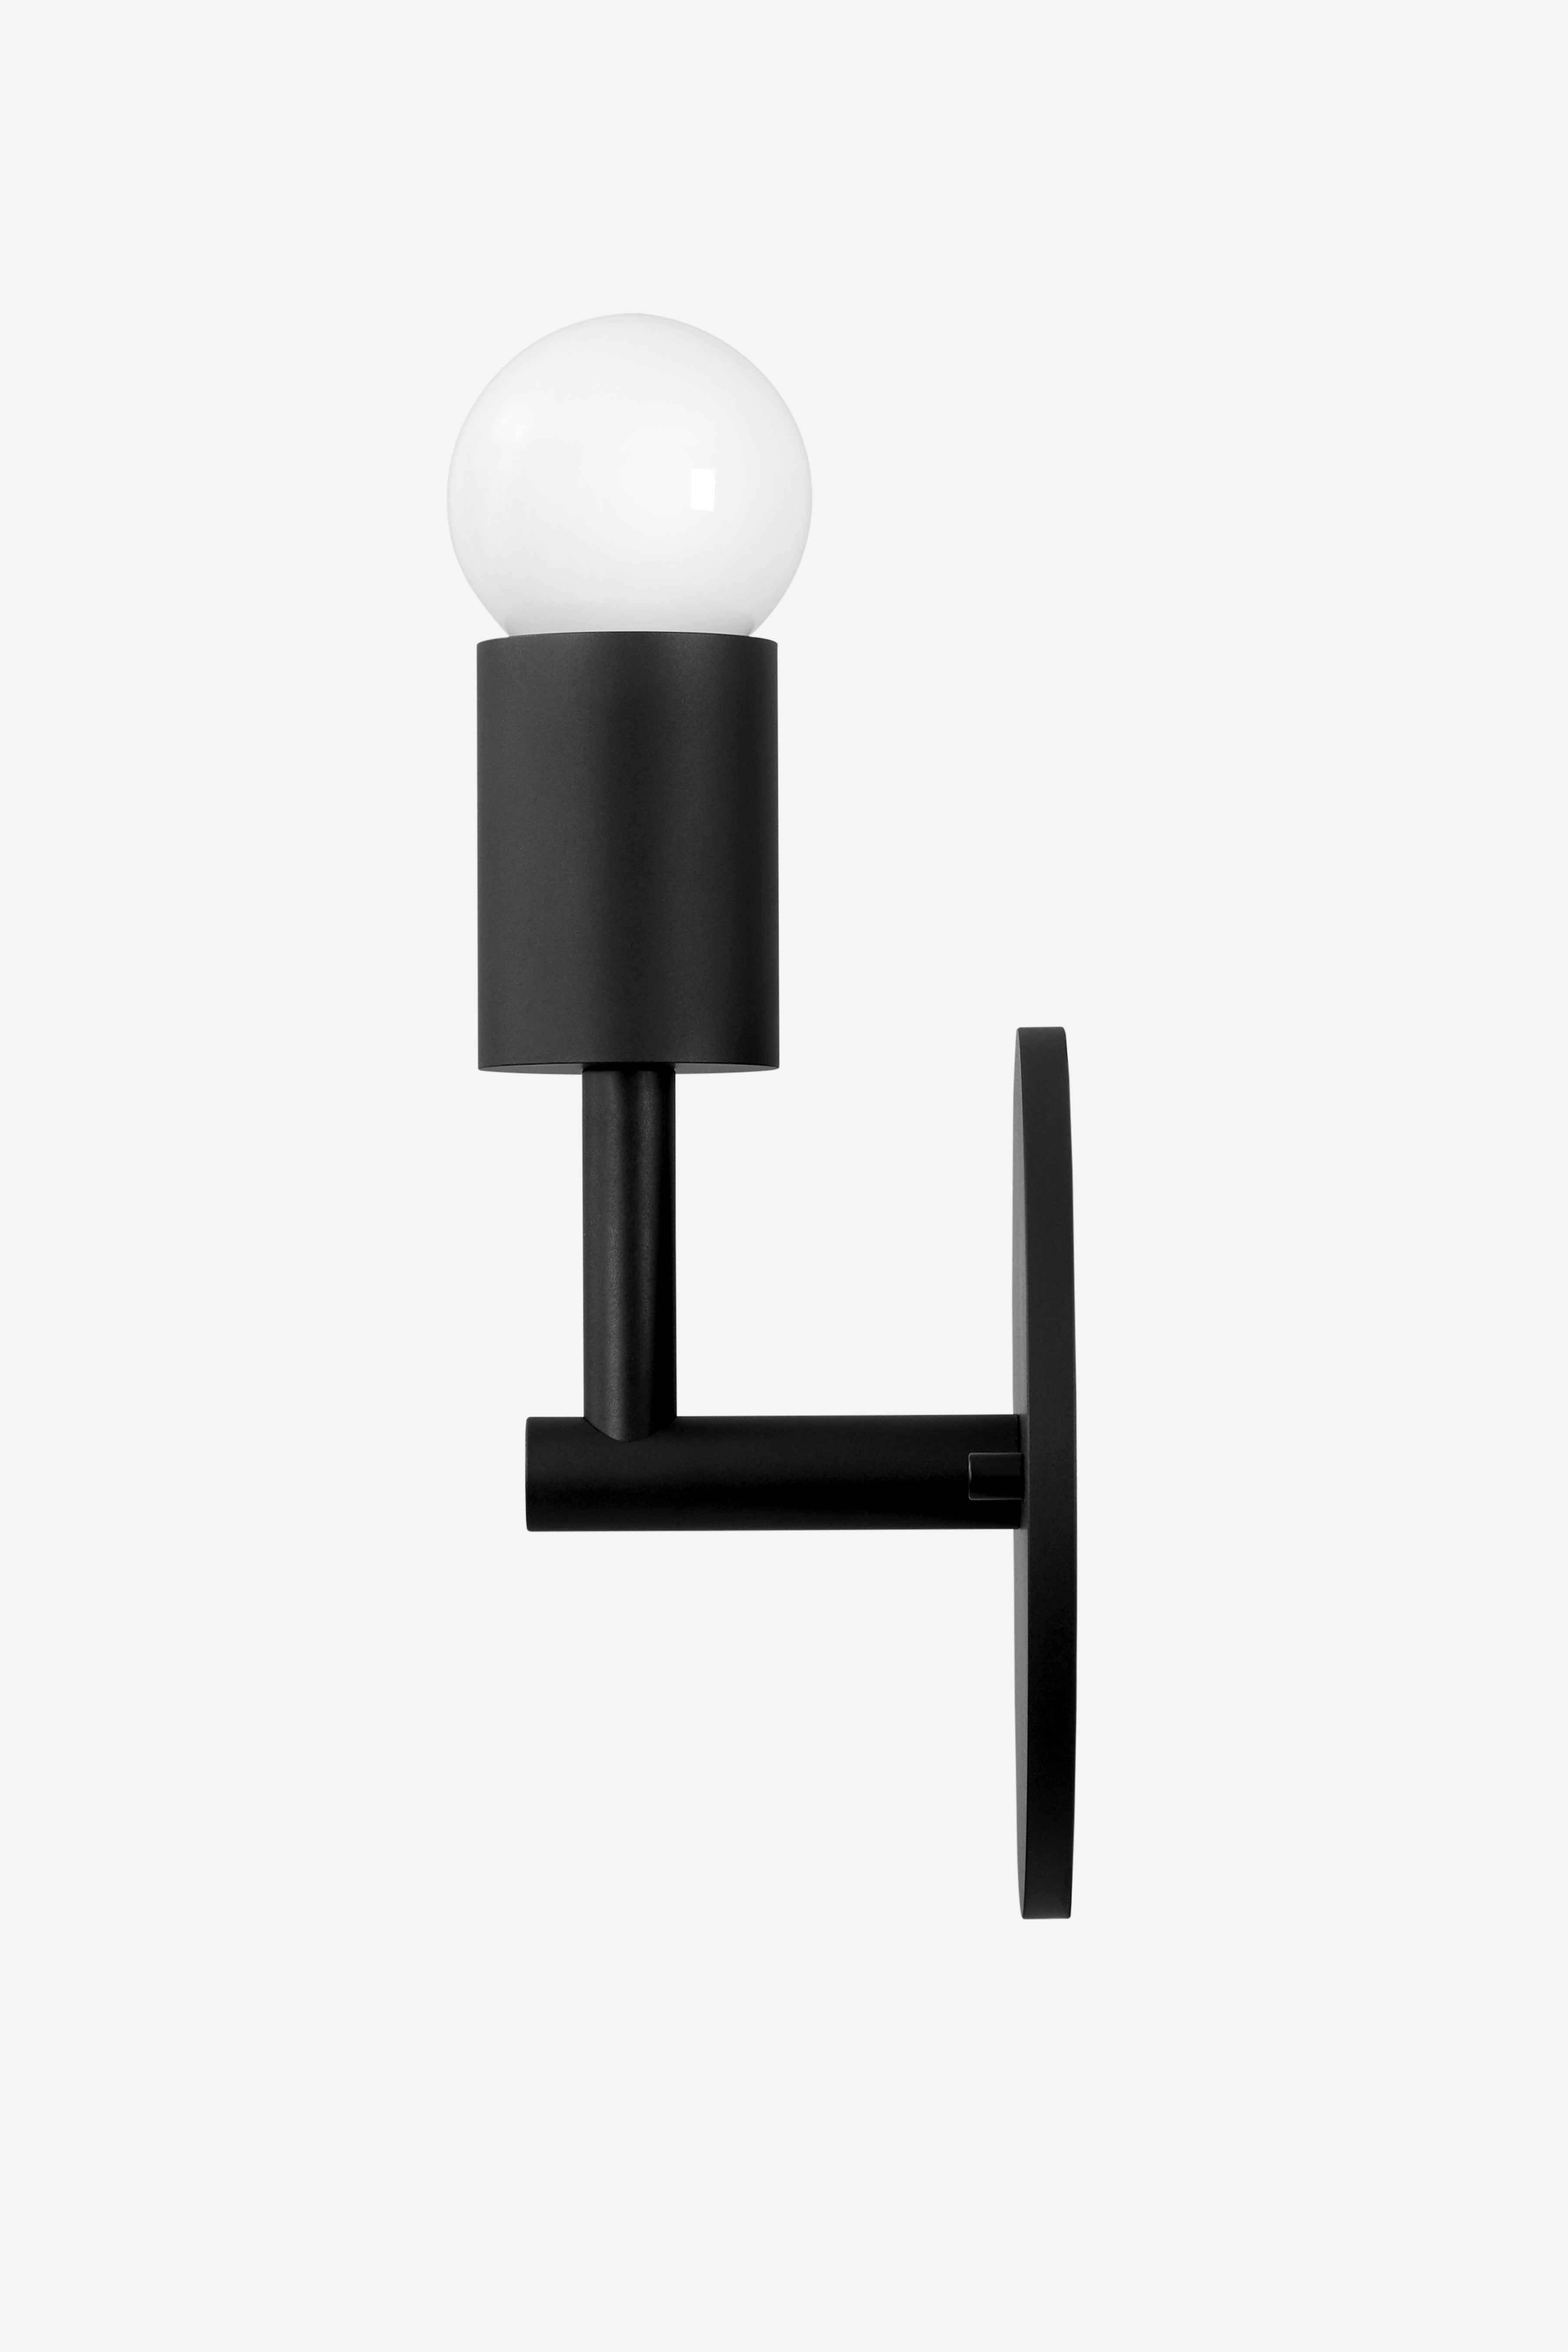 Afton Small QS / Sconce / Black